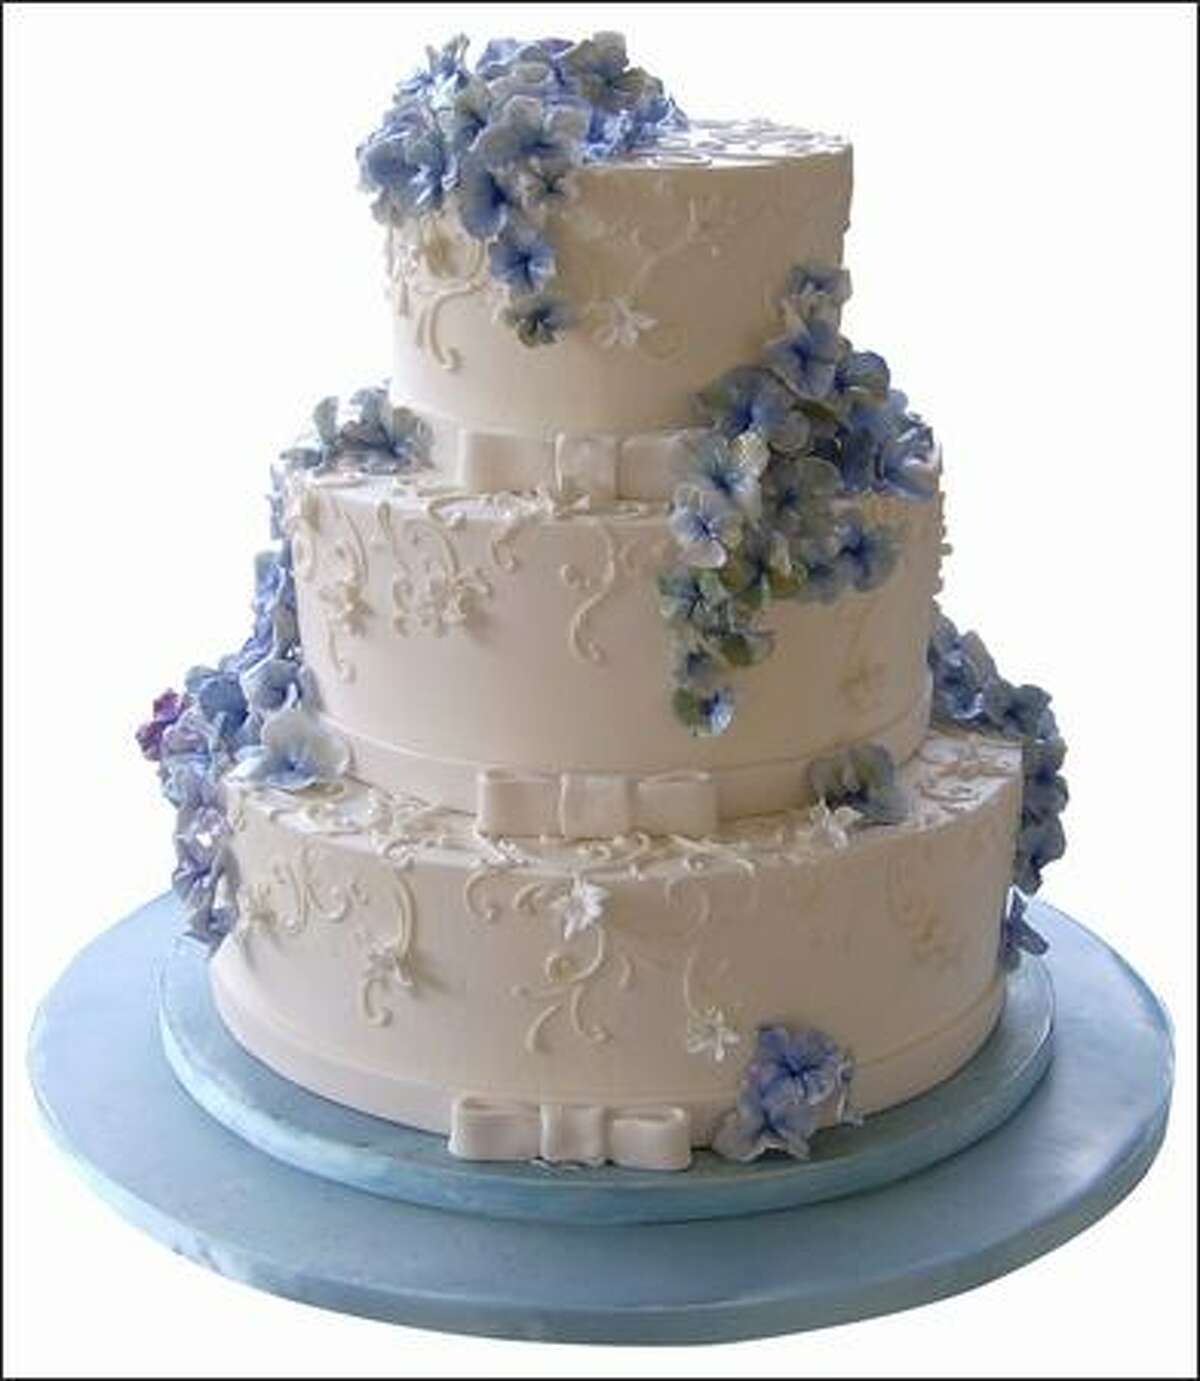 Aimee Page of Hollyhock Cakes created this organic work of art with sugar hydrangeas.